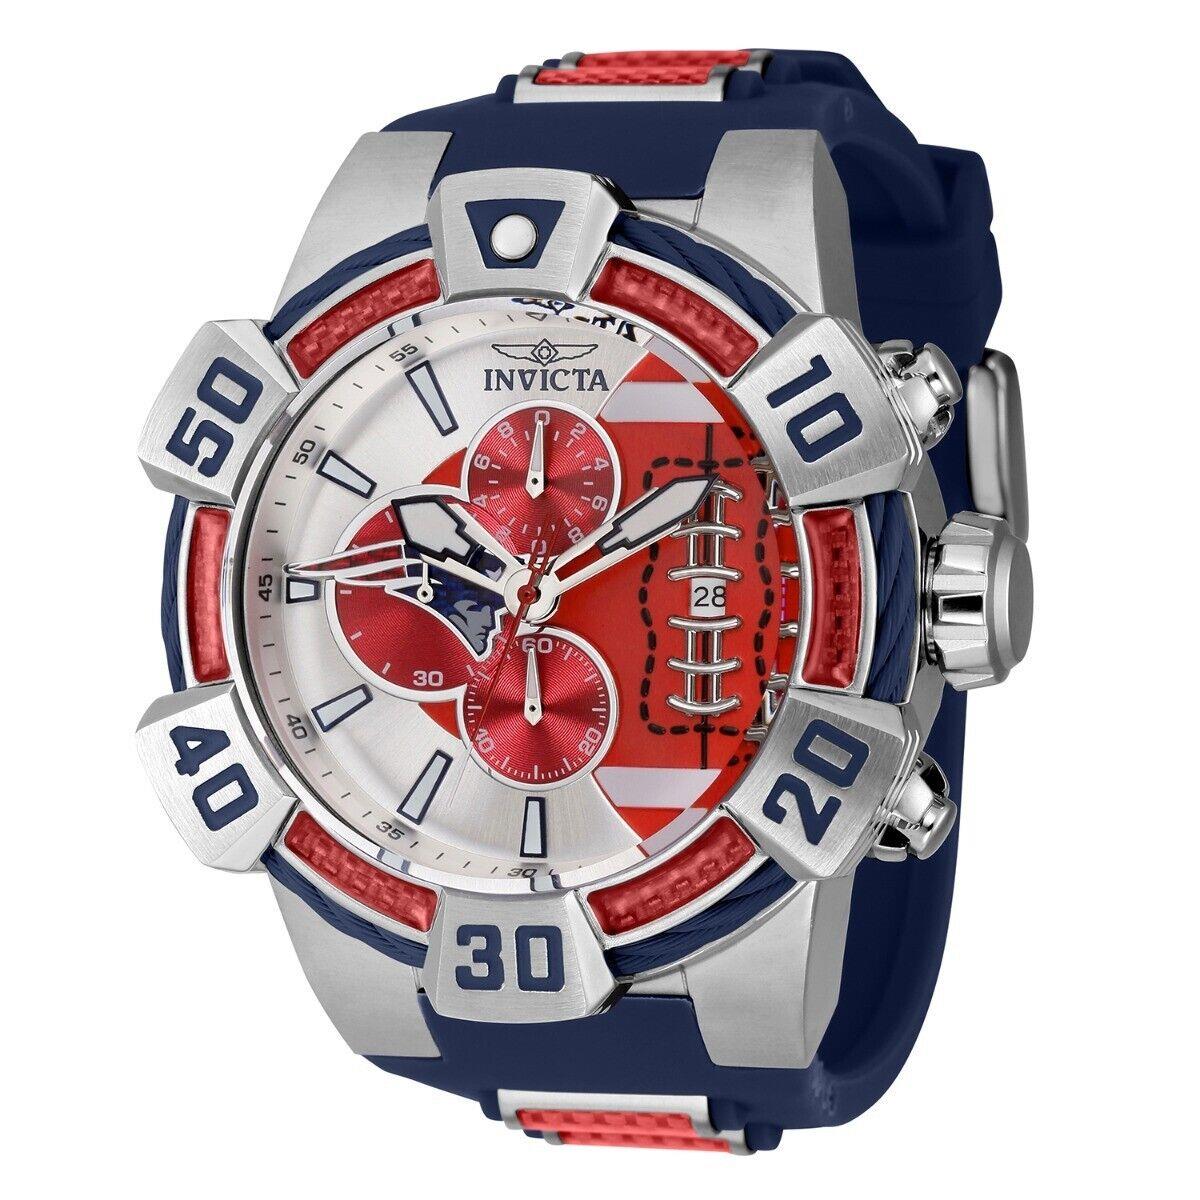 Invicta Nfl England Patriots Men`s Watch - 52mm Blue Red 41573 - Dial: Blue, Red, Silver, Band: strong blue, red